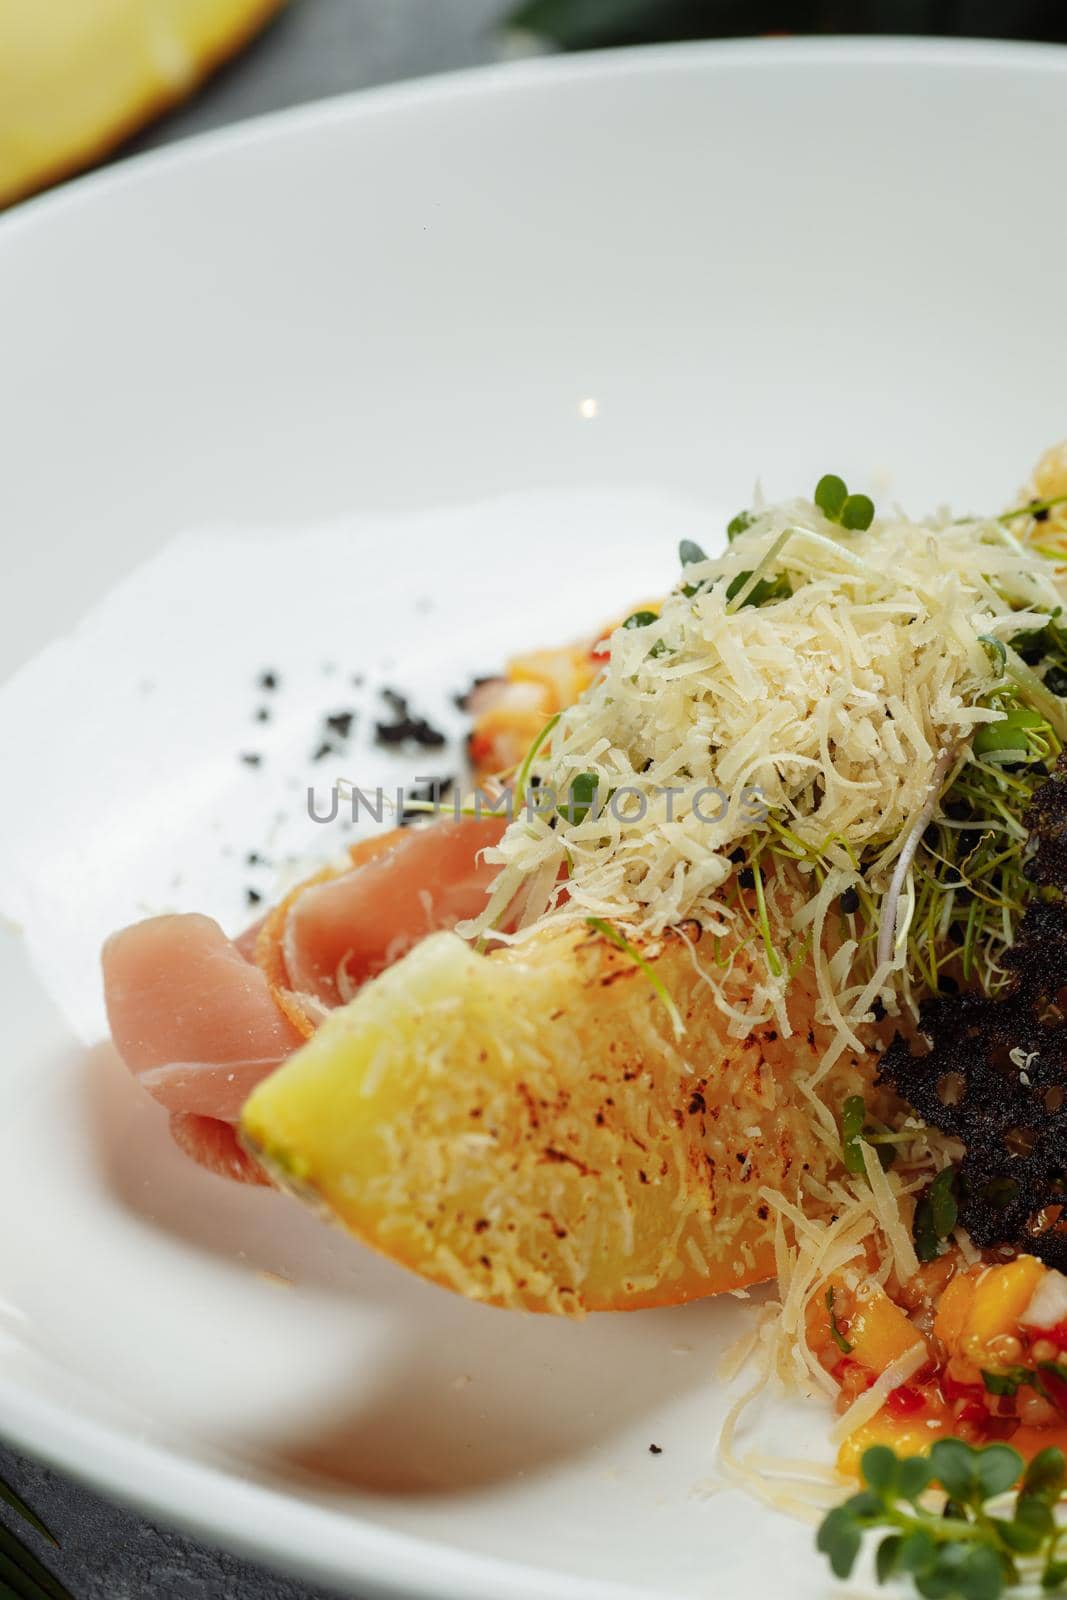 baked melon with parmesan and jamon on a white plate.